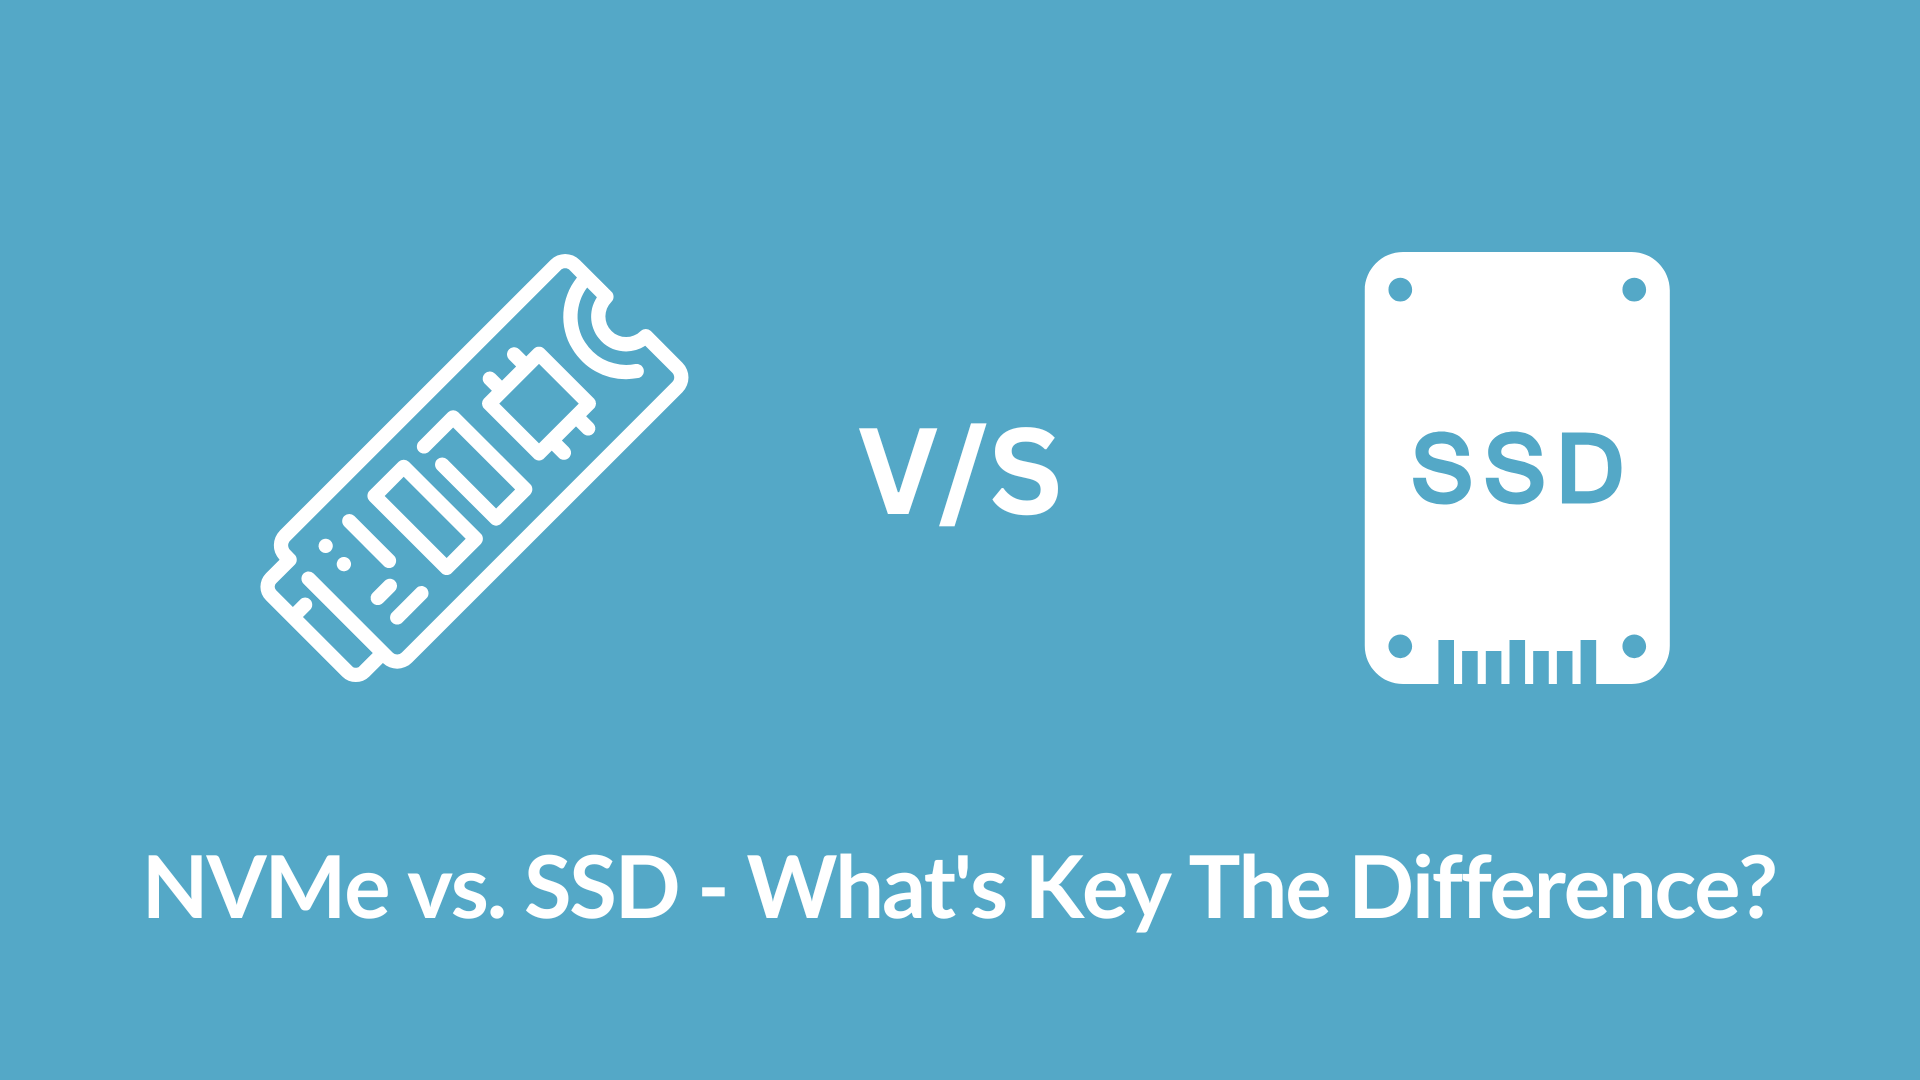 NVMe vs. SSD - What's Key The Difference?